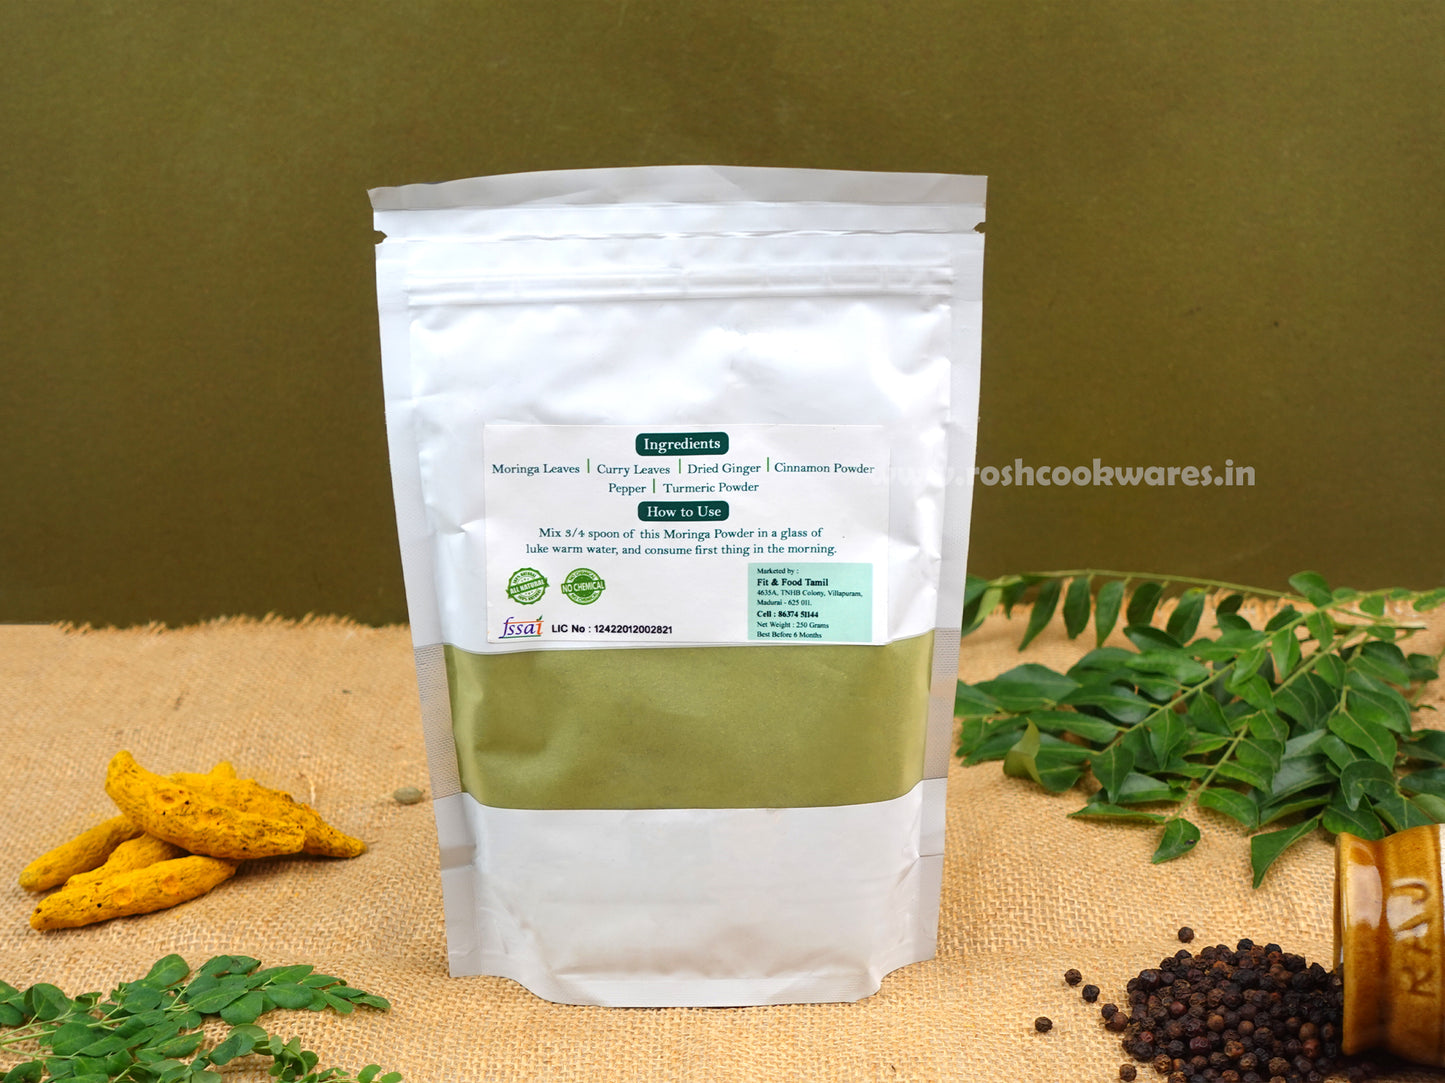 Moringa Leaf Powder (Home Made From Fit & Food).